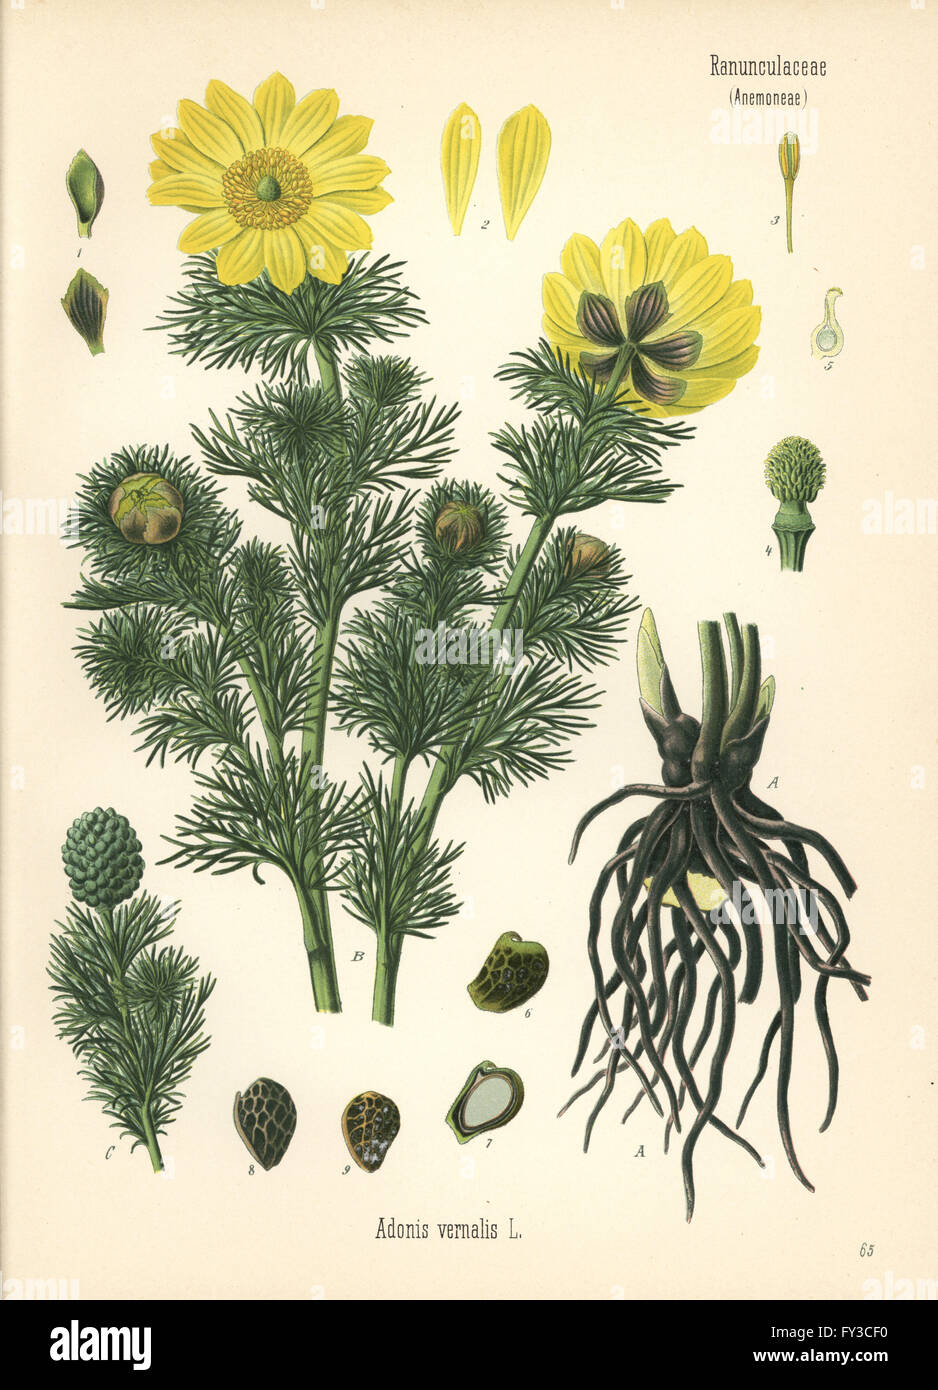 Spring pheasant's eye, Adonis vernalis. Chromolithograph after a botanical illustration from Hermann Adolph Koehler's Medicinal Plants, edited by Gustav Pabst, Koehler, Germany, 1887. Stock Photo